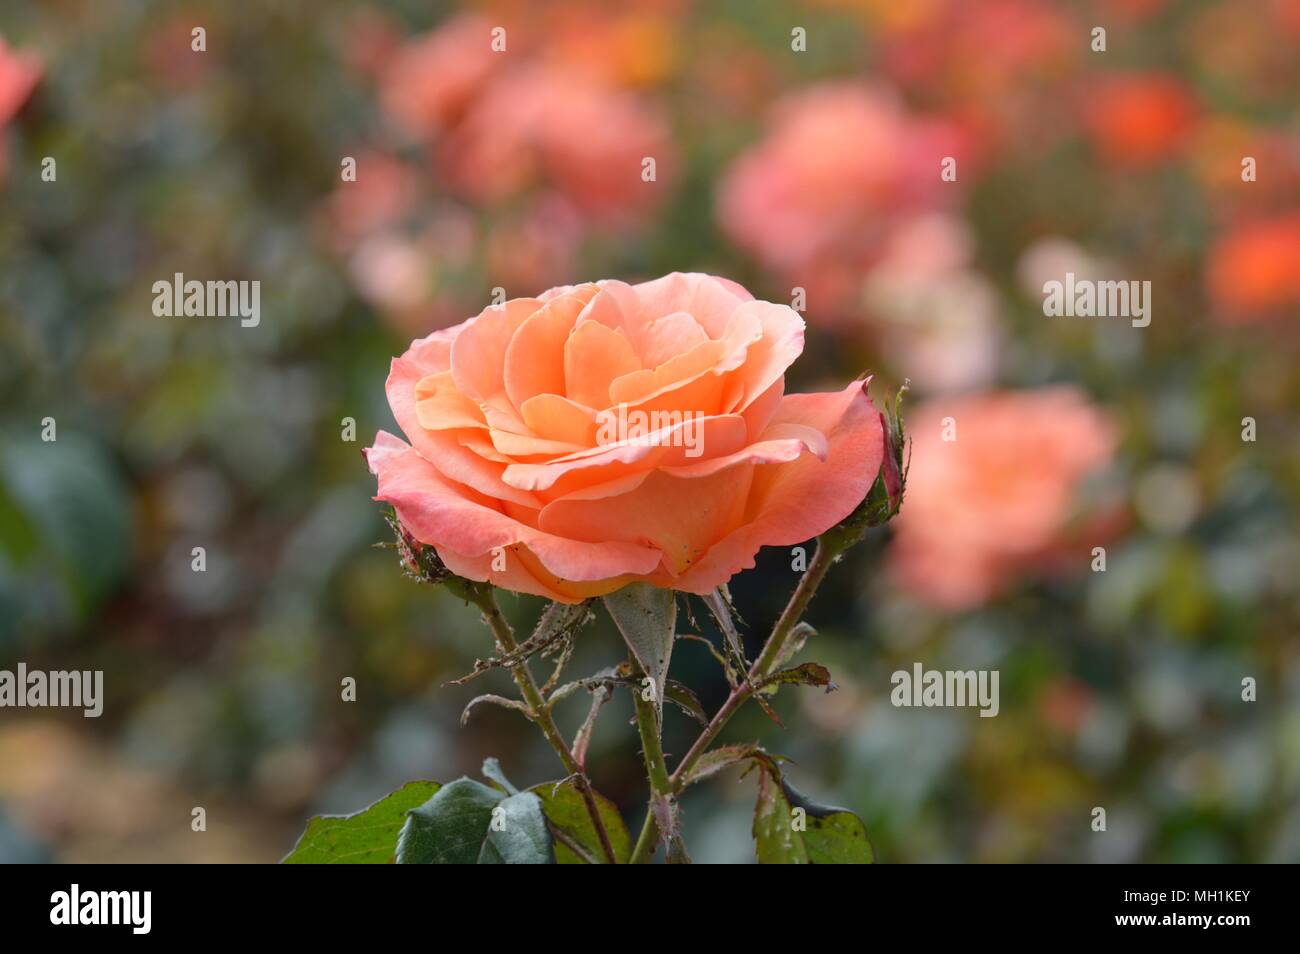 Mama Rose High Resolution Stock Photography and Images - Alamy